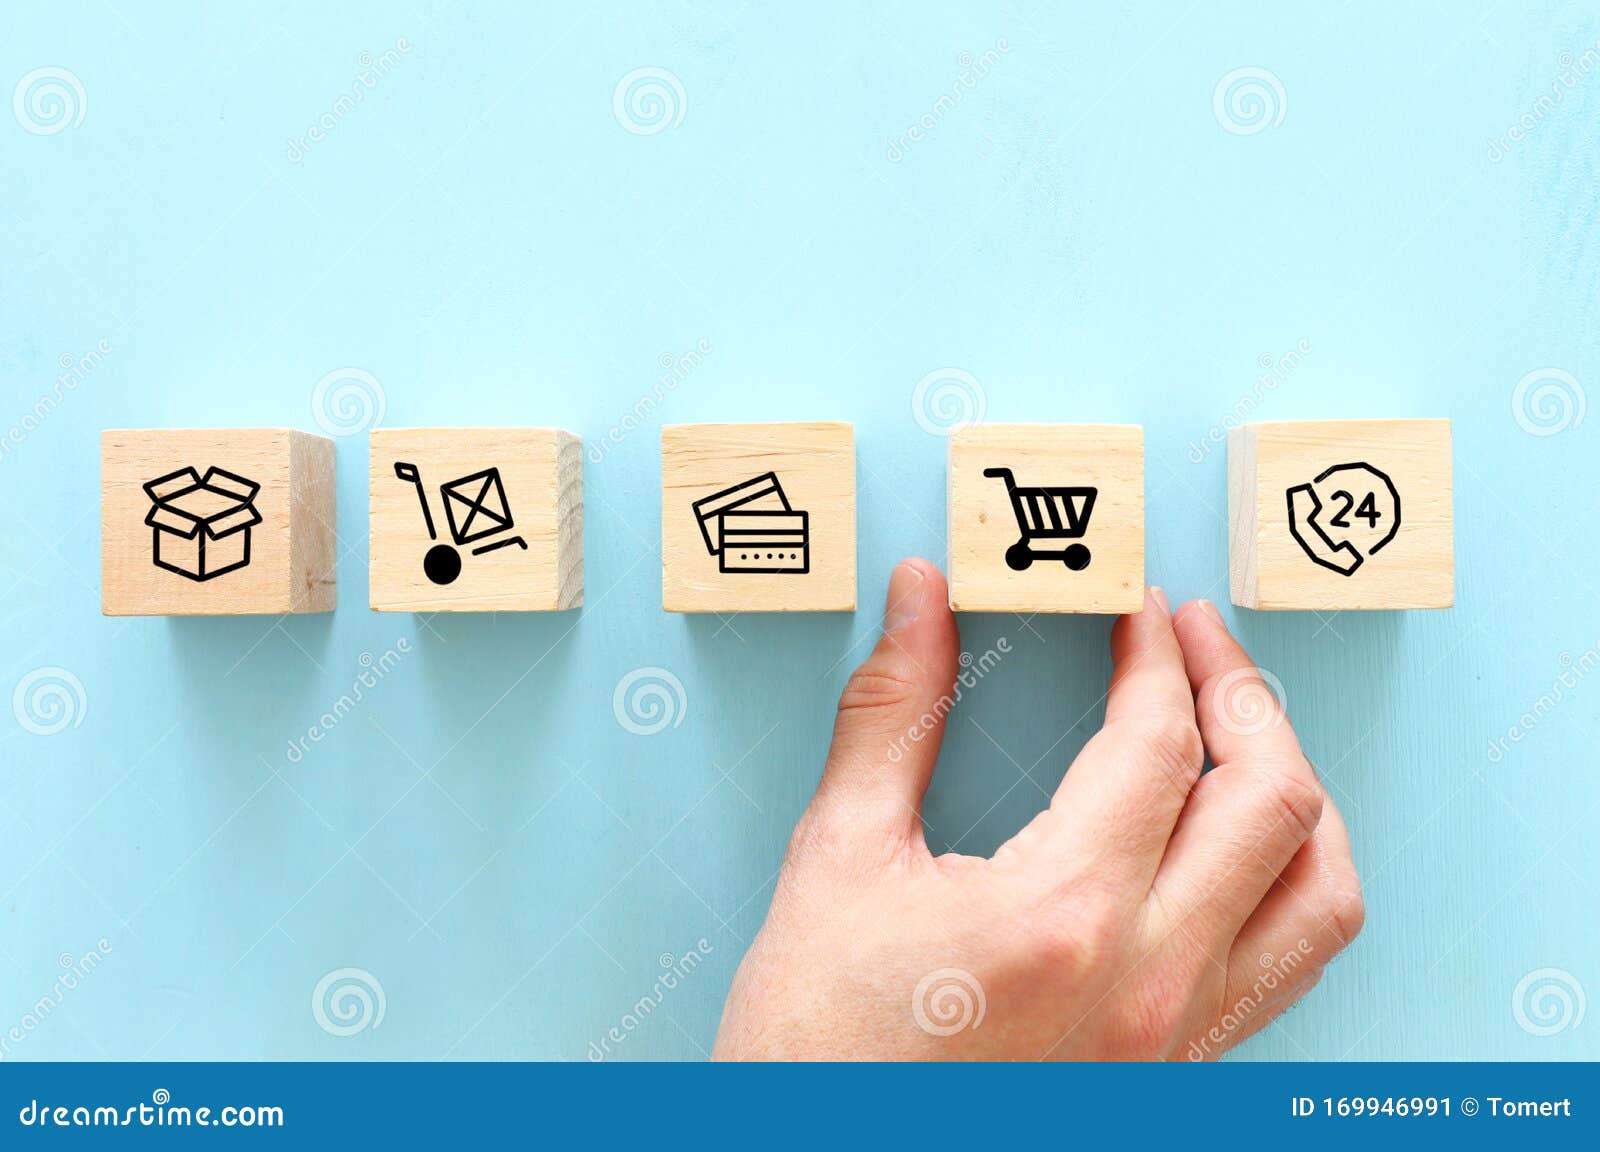 shopping and bussines concept. hand picking wooden cube